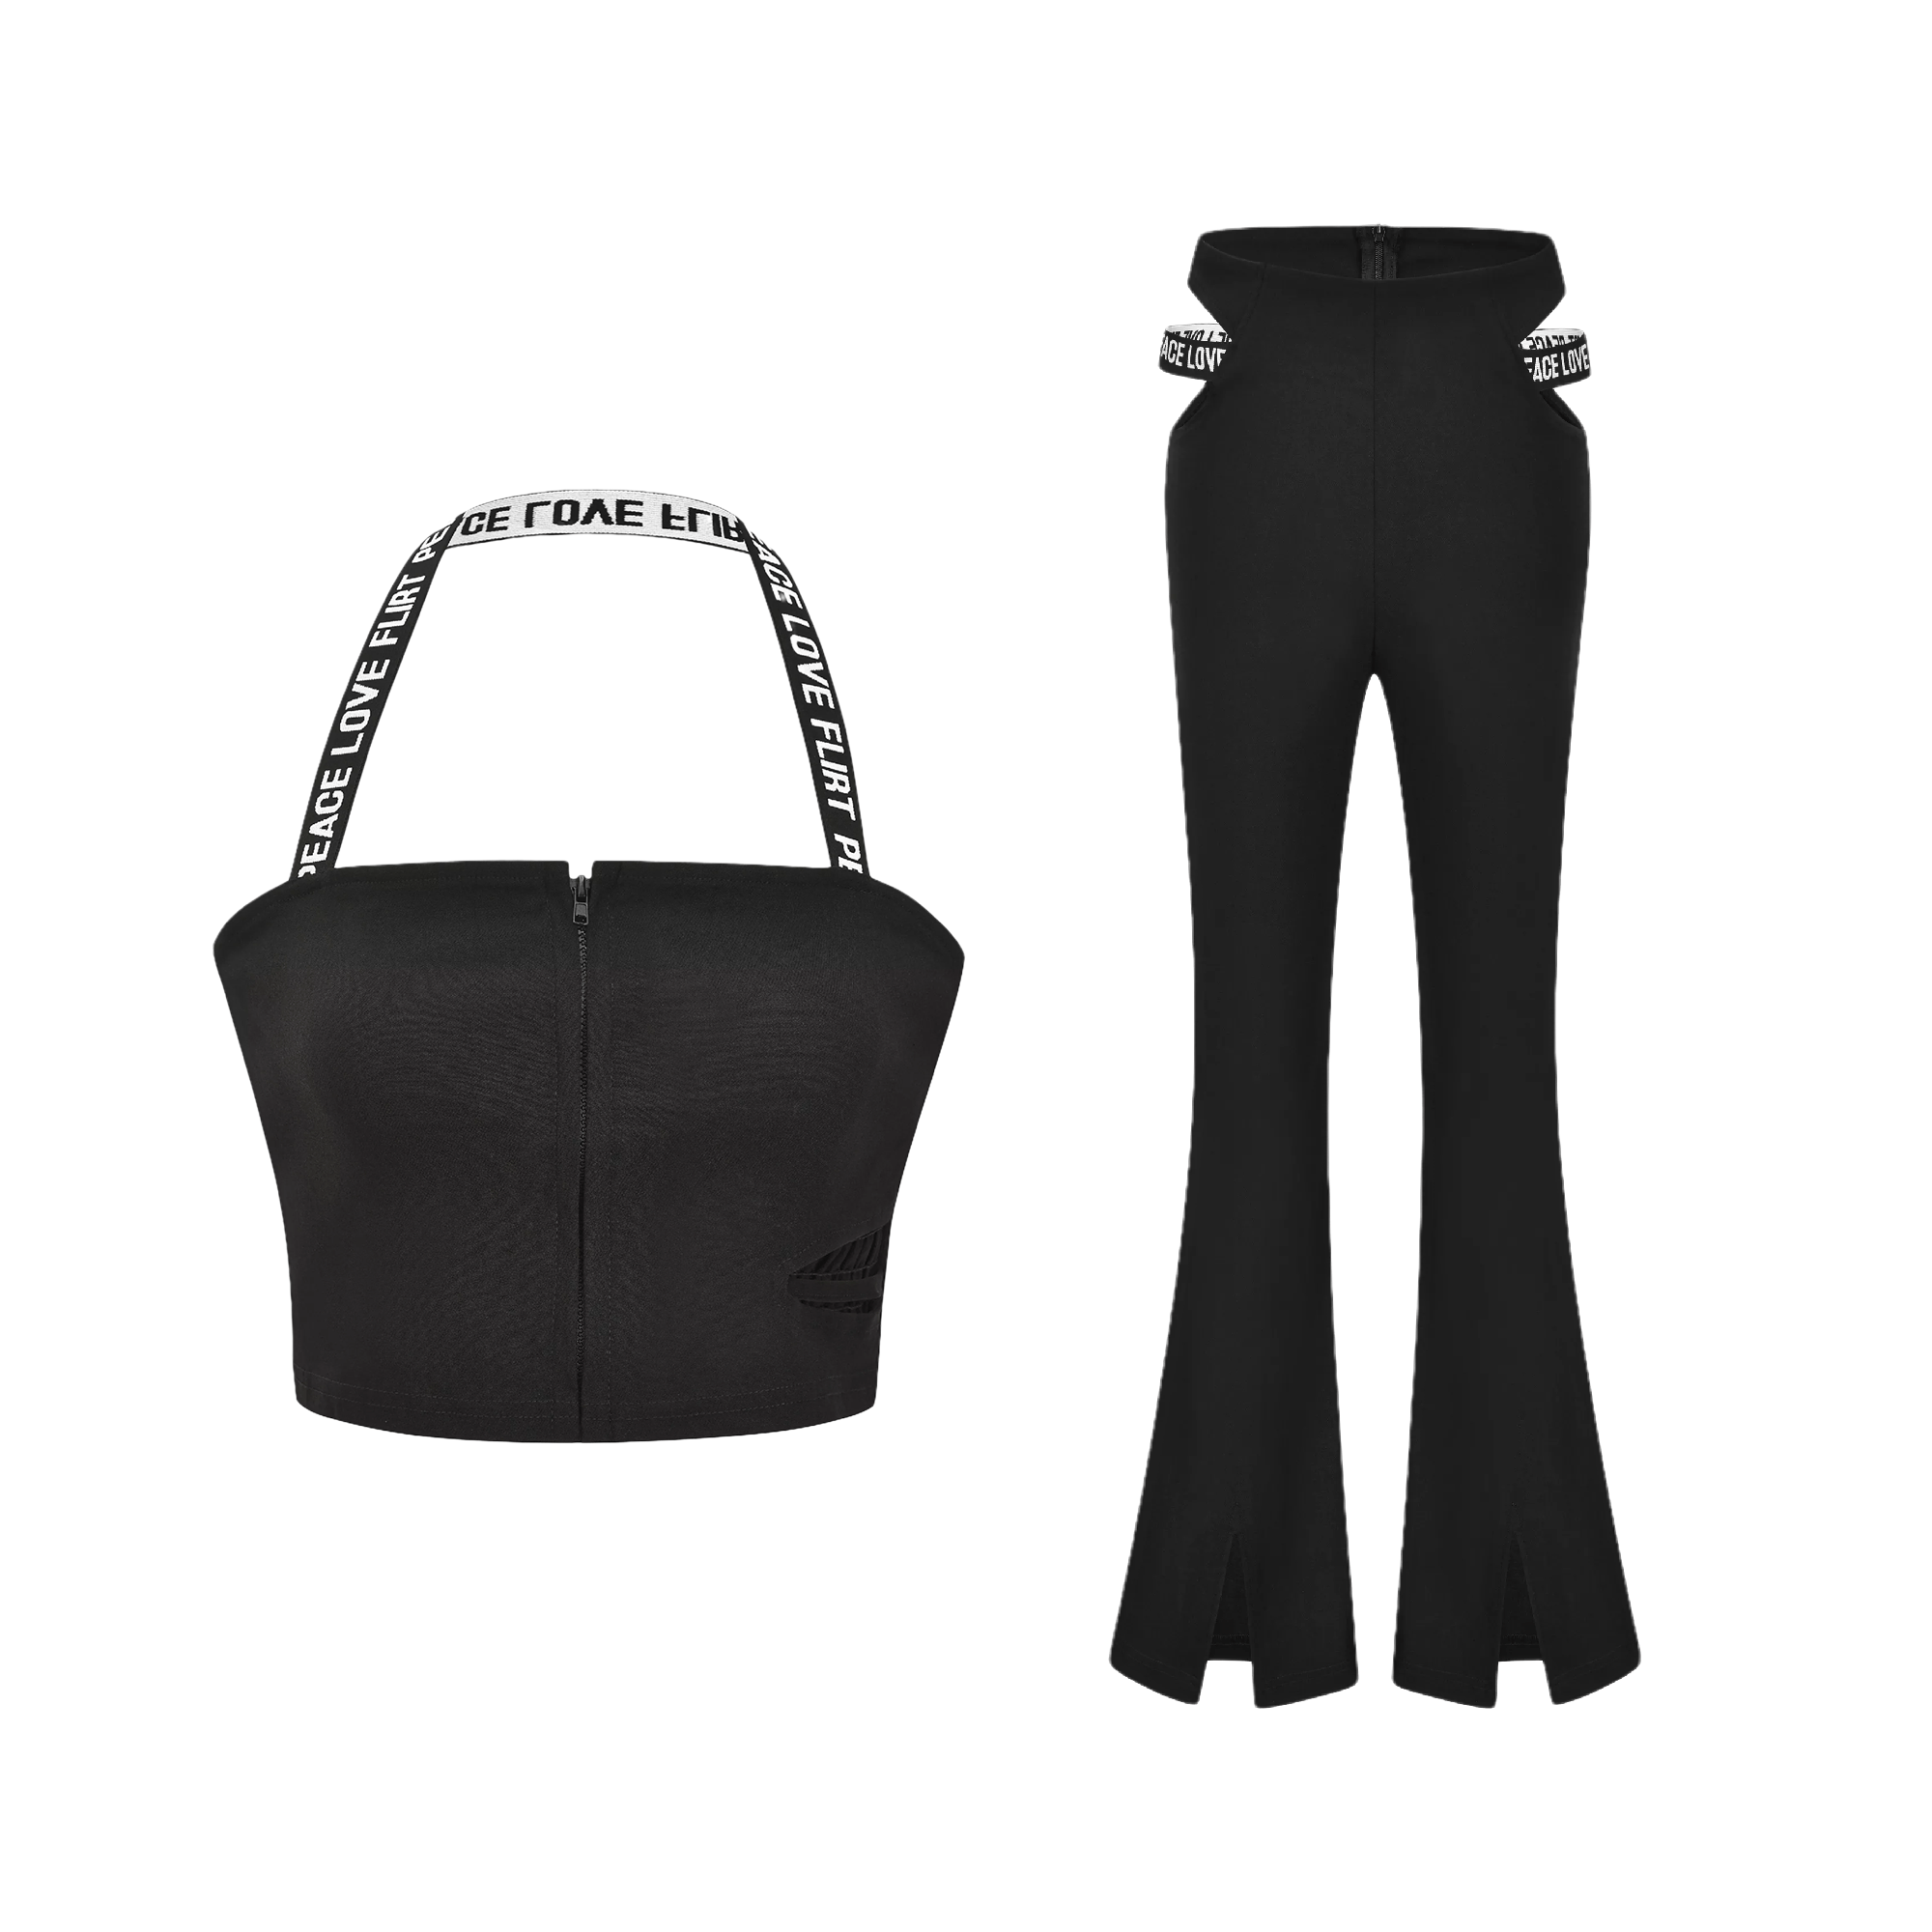 Black Mamba-cut-out crop top & trousers matching set - itsy, it‘s different